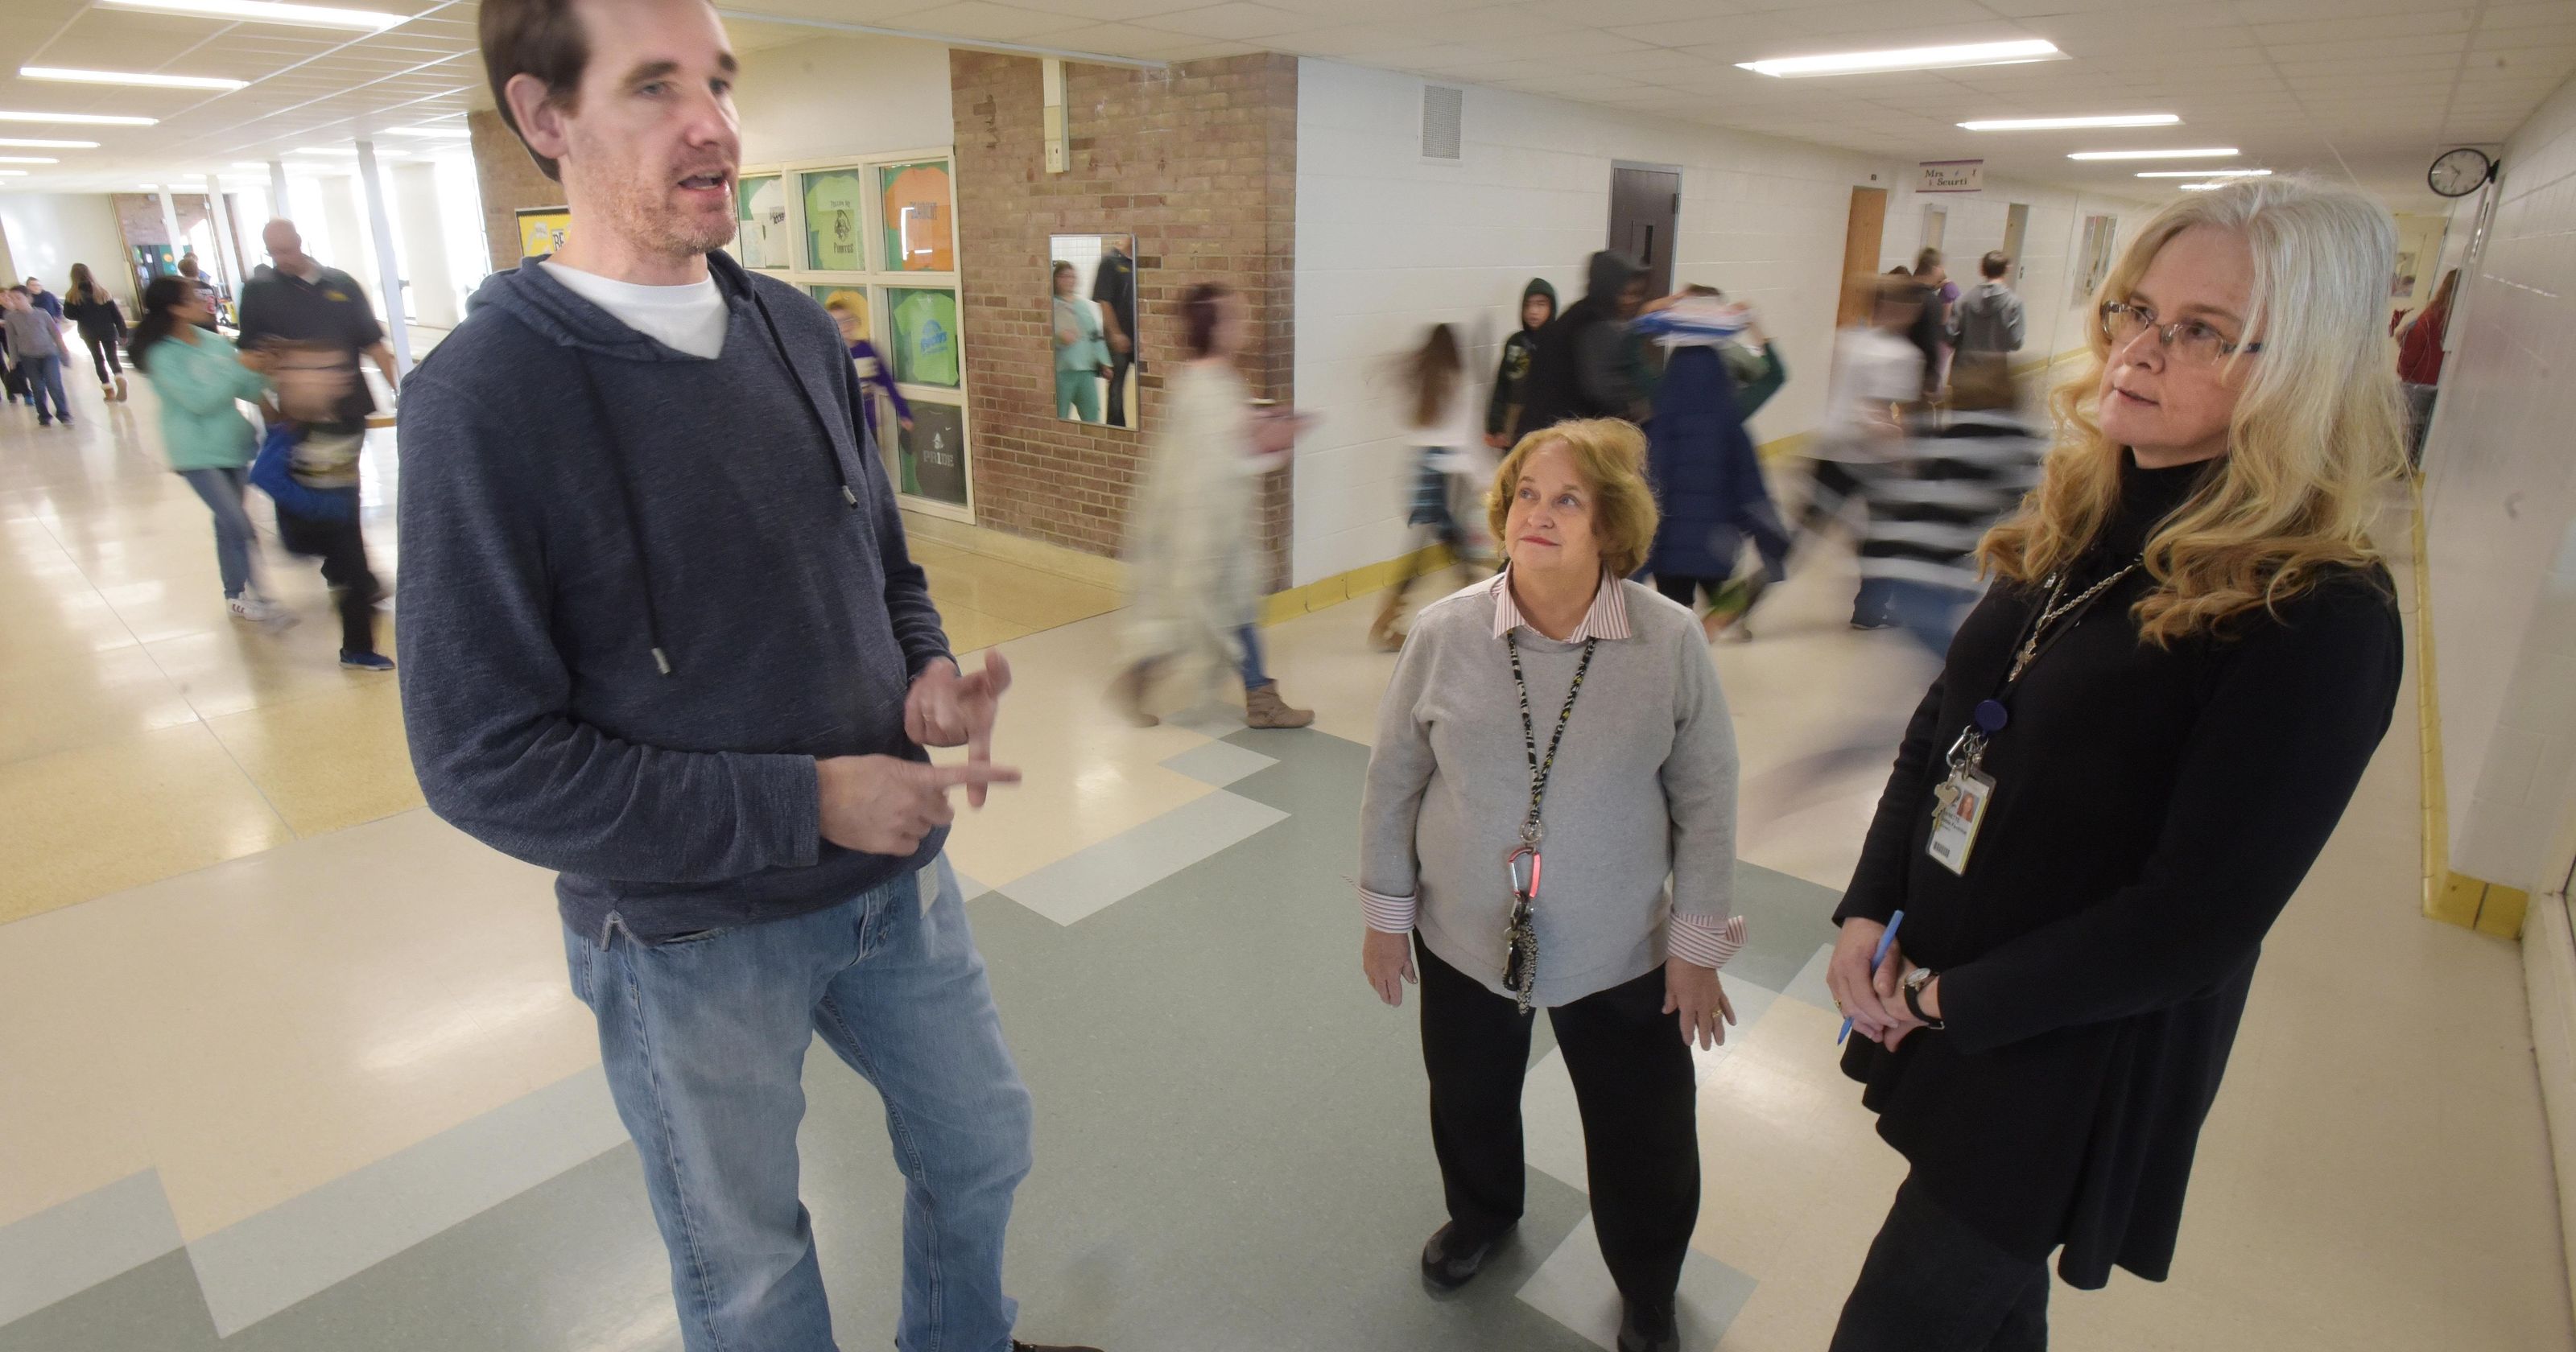 Pierce Middle School counselor Jeff Tunnicliff, left, Waterford truancy coordinator Becky Staab and Pierce Middle School counselor Annette Noble-Farmiloe discuss student absenteeism last week at Pierce in Waterford Township.